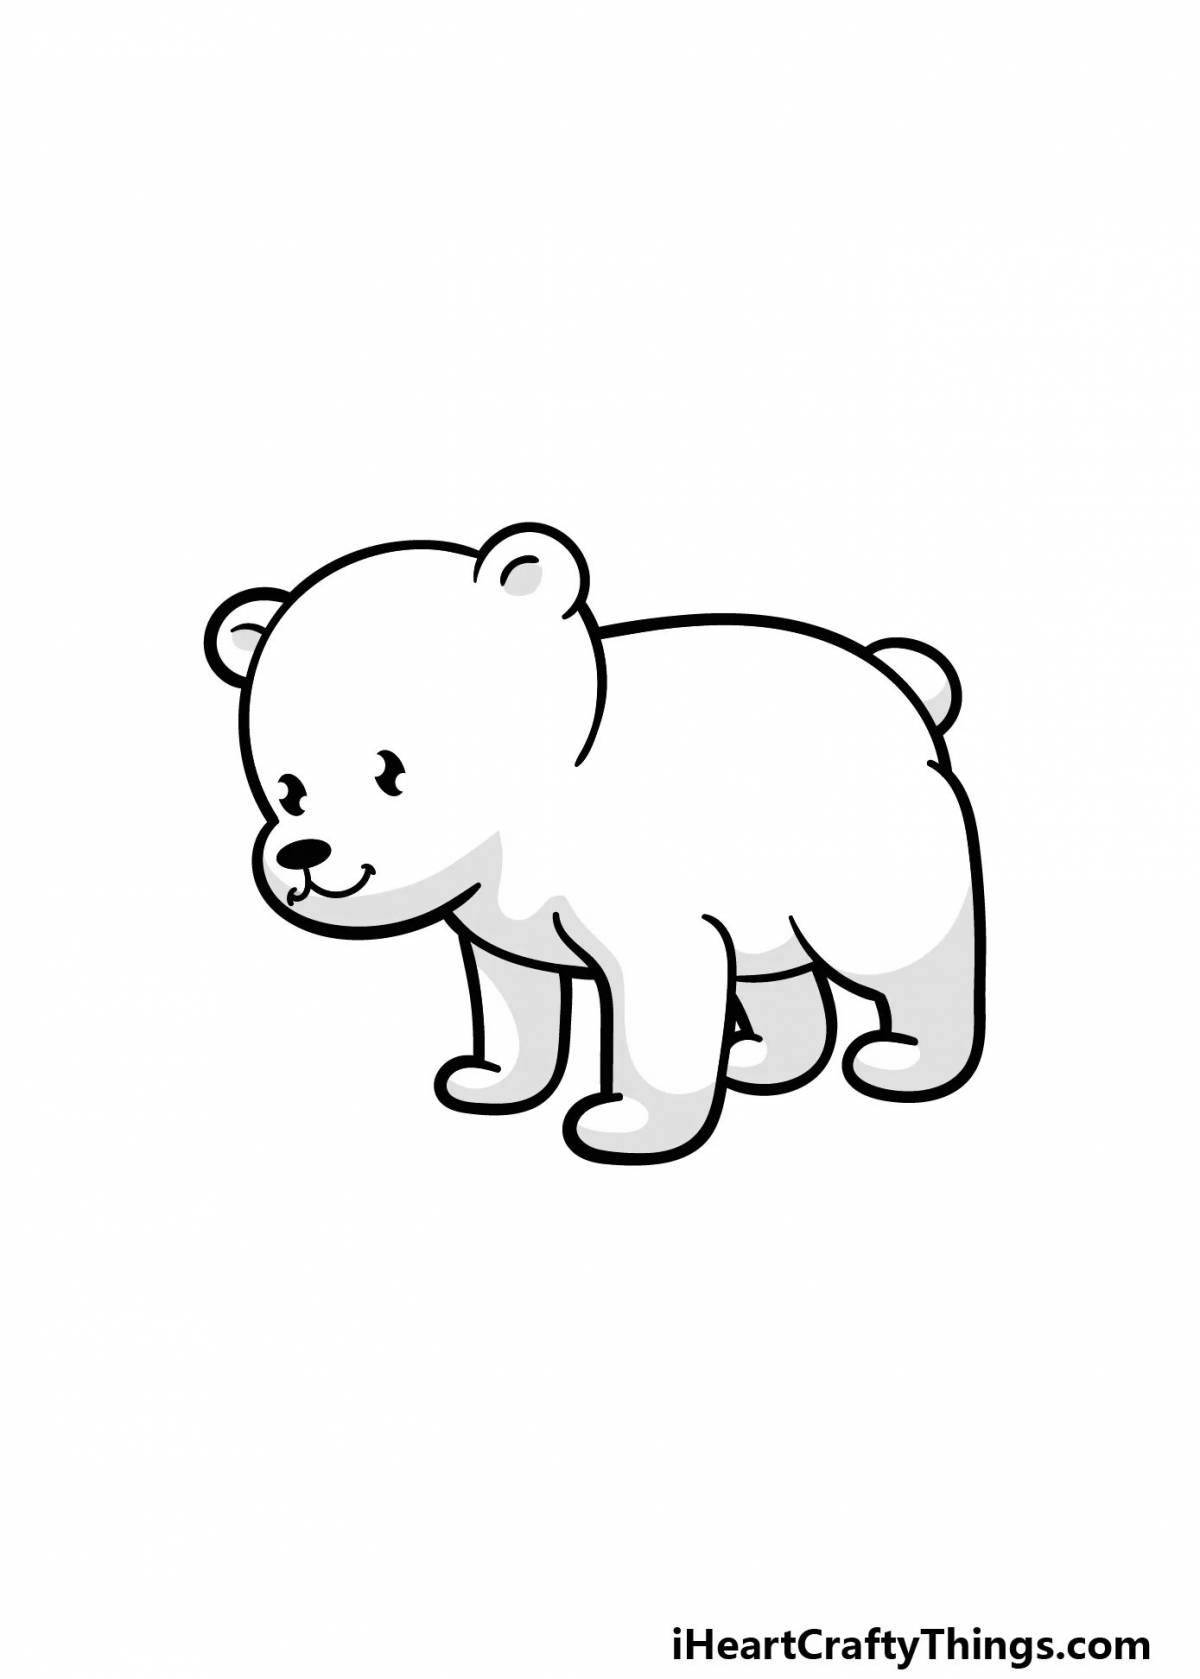 Outstanding polar bear coloring book for 6-7 year olds